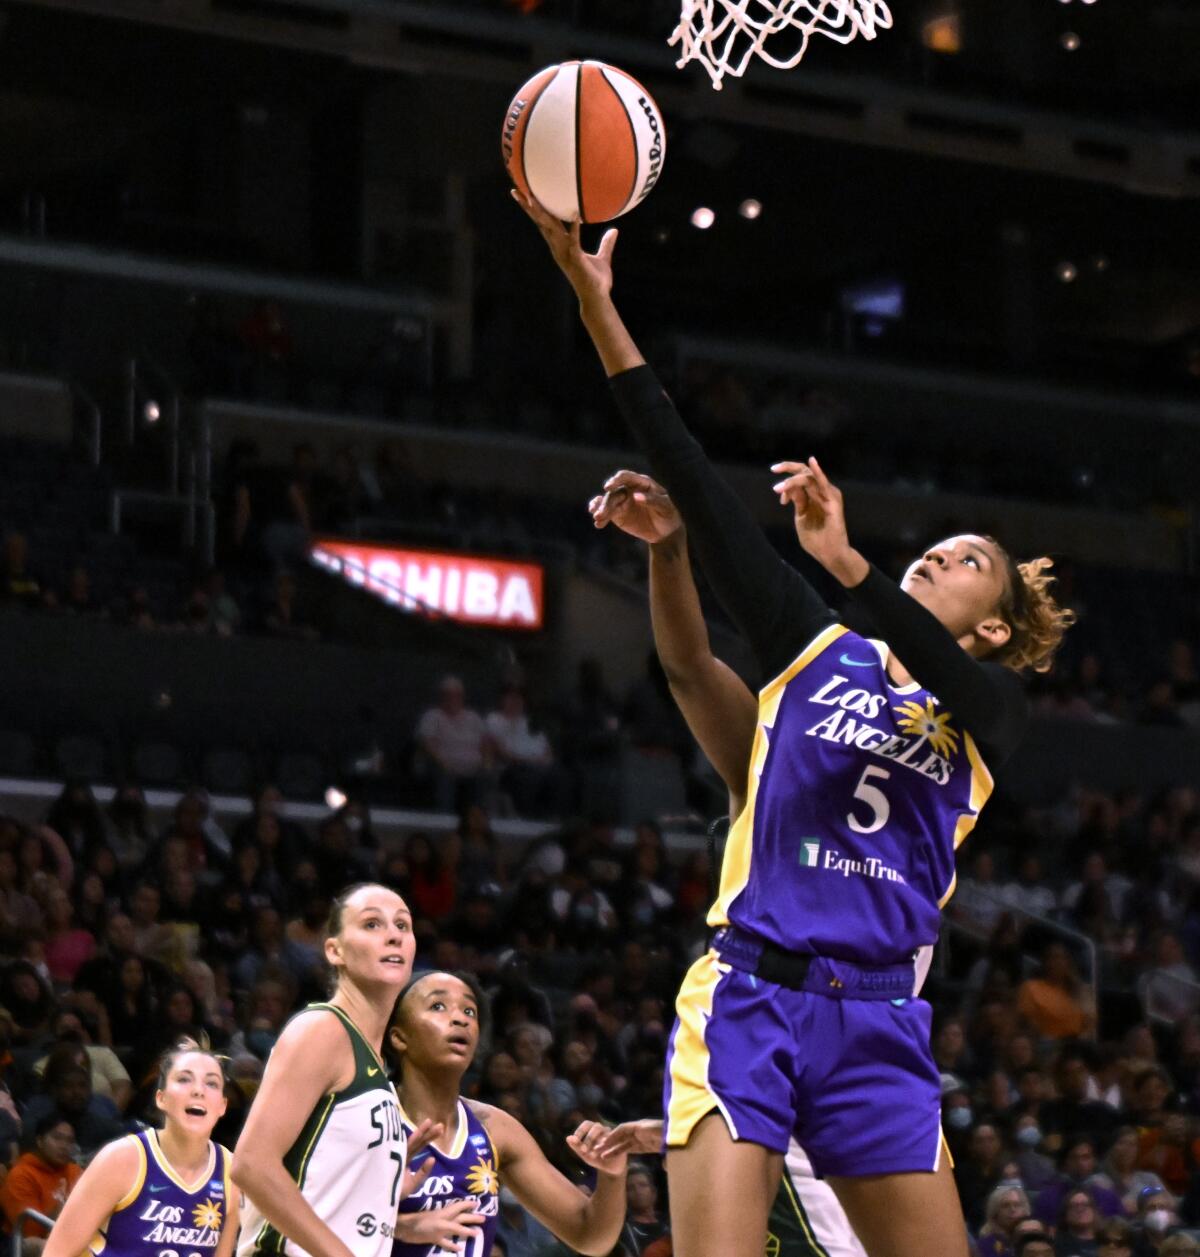 Los Angeles Sparks guard Kianna Smith drives to the basket against the Seattle Storm during the second half of a WNBA basketball game Thursday, July 7, 2022, in Los Angeles. (Keith Birmingham/The Orange County Register via AP)